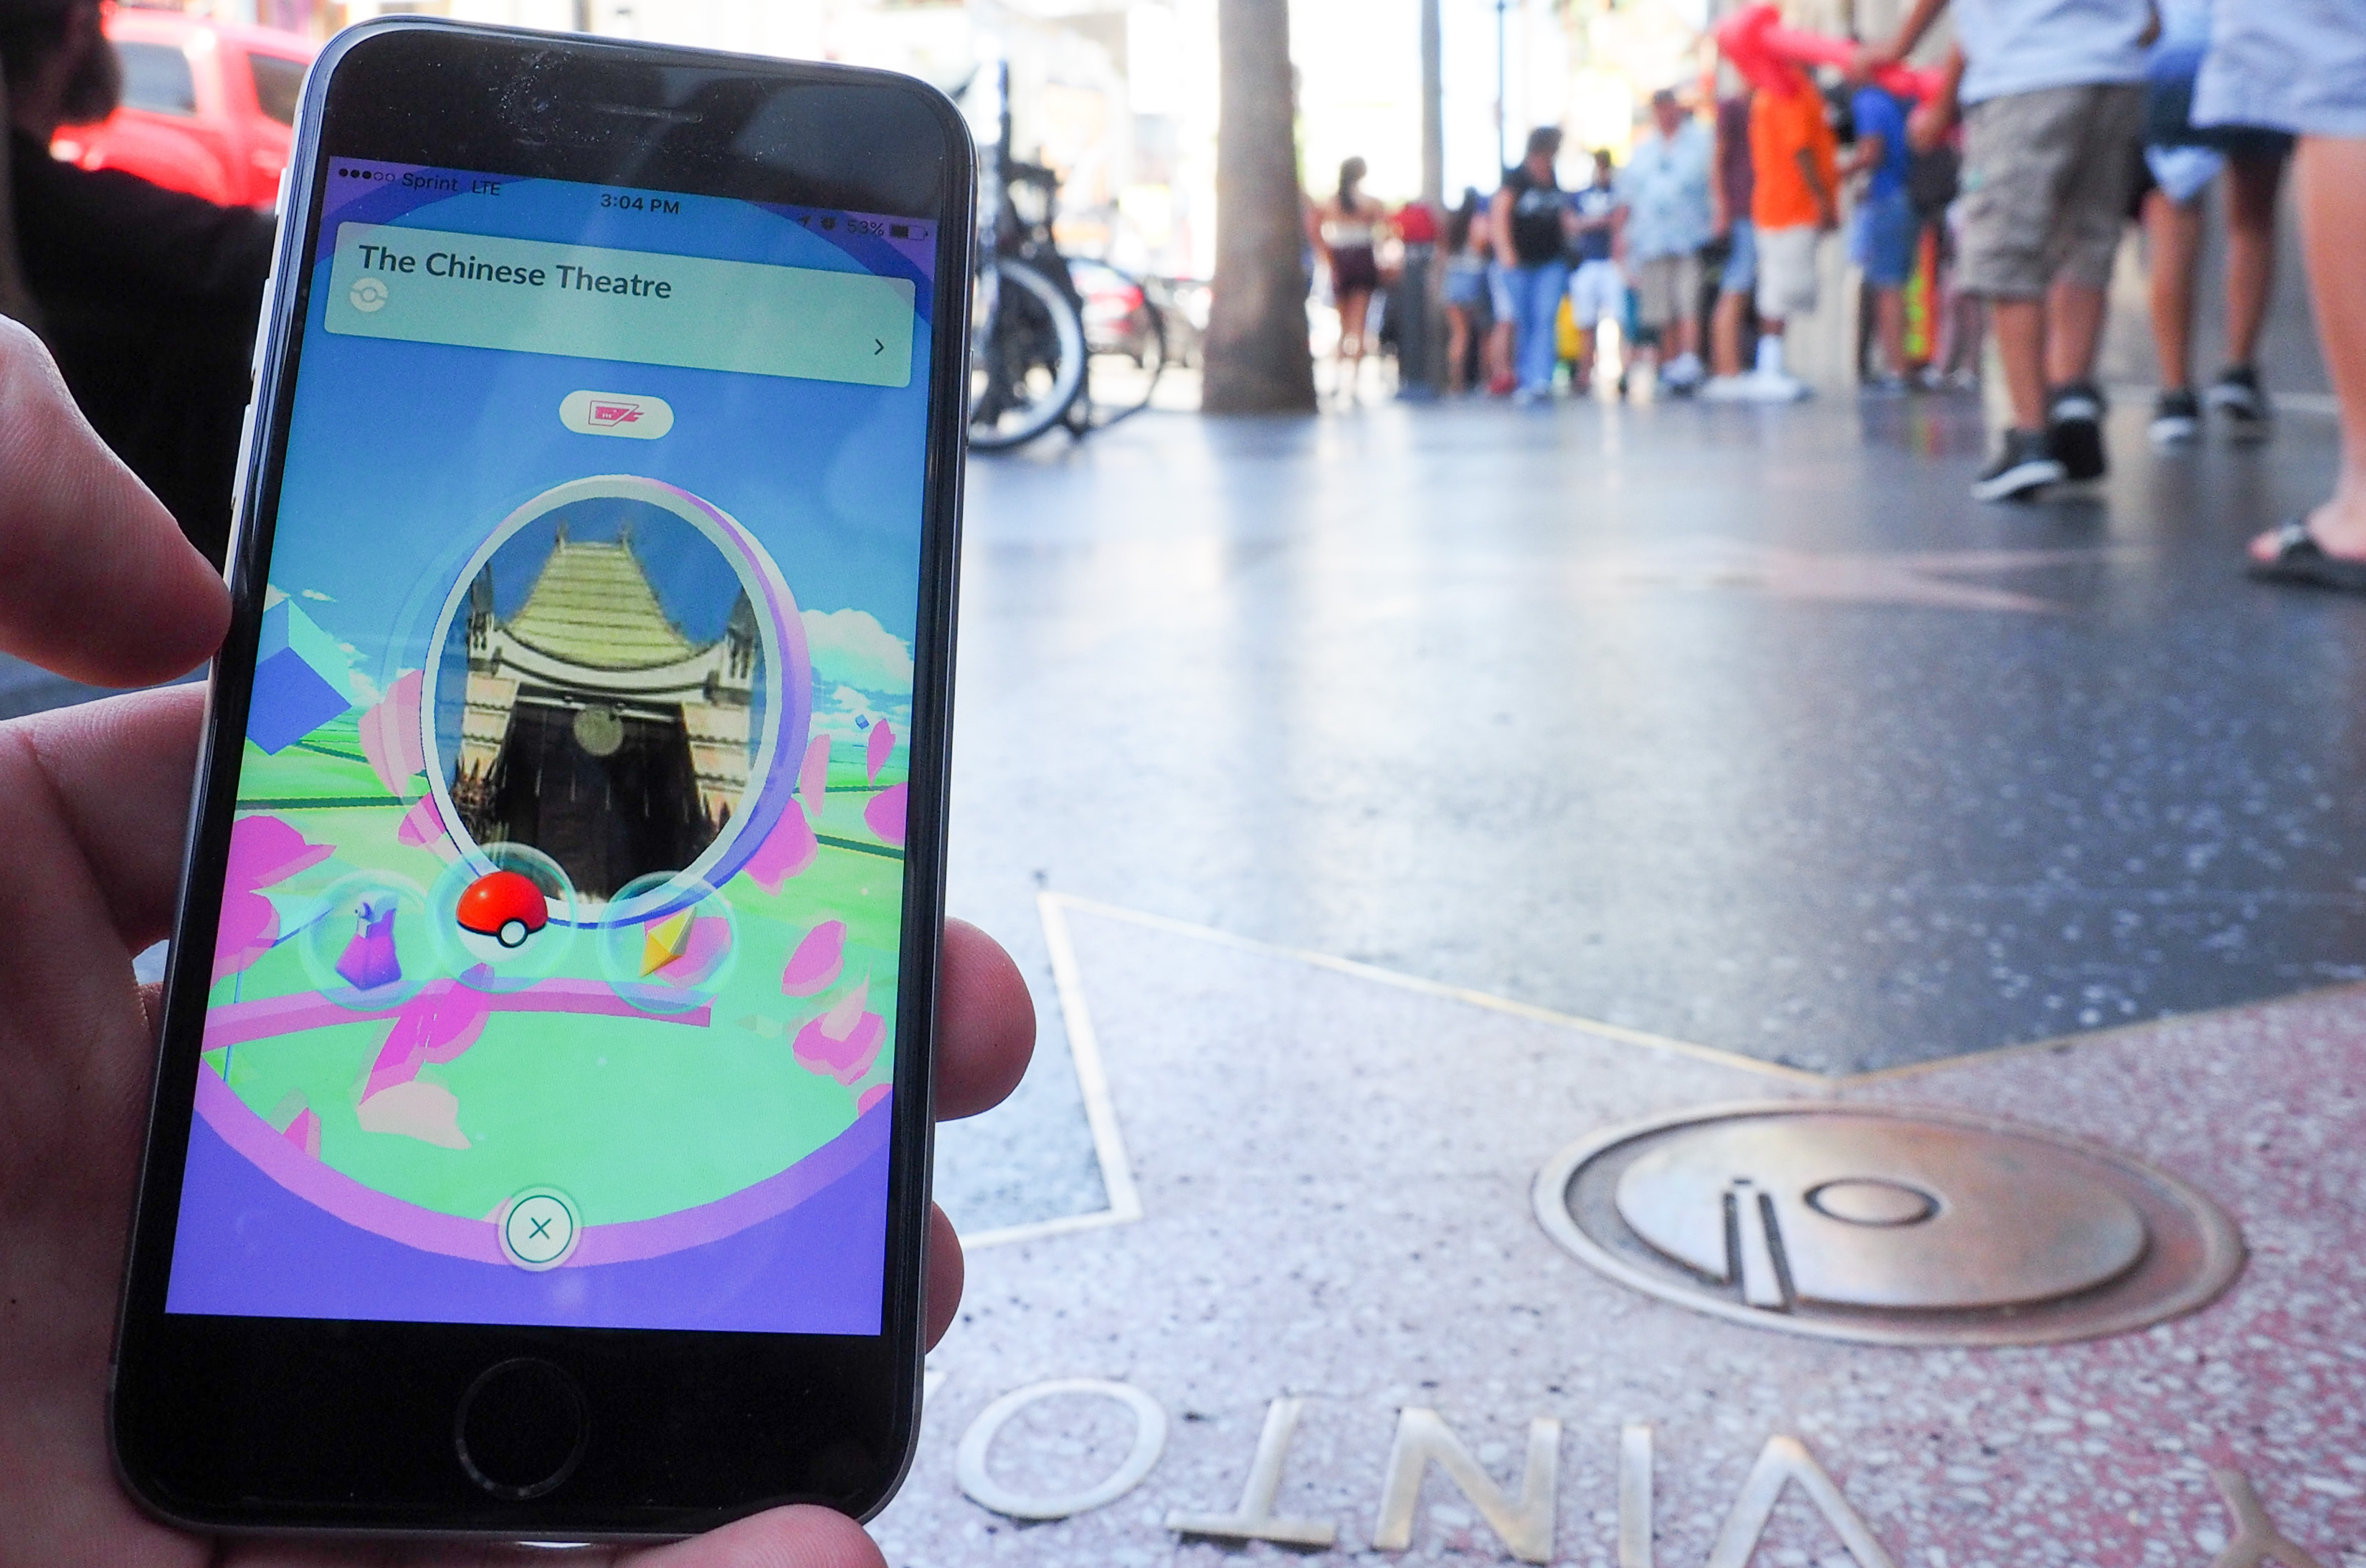 Court Decides LAPD Officers Who Played Pokémon Go on the Job Are Officially out of Work - Newsweek